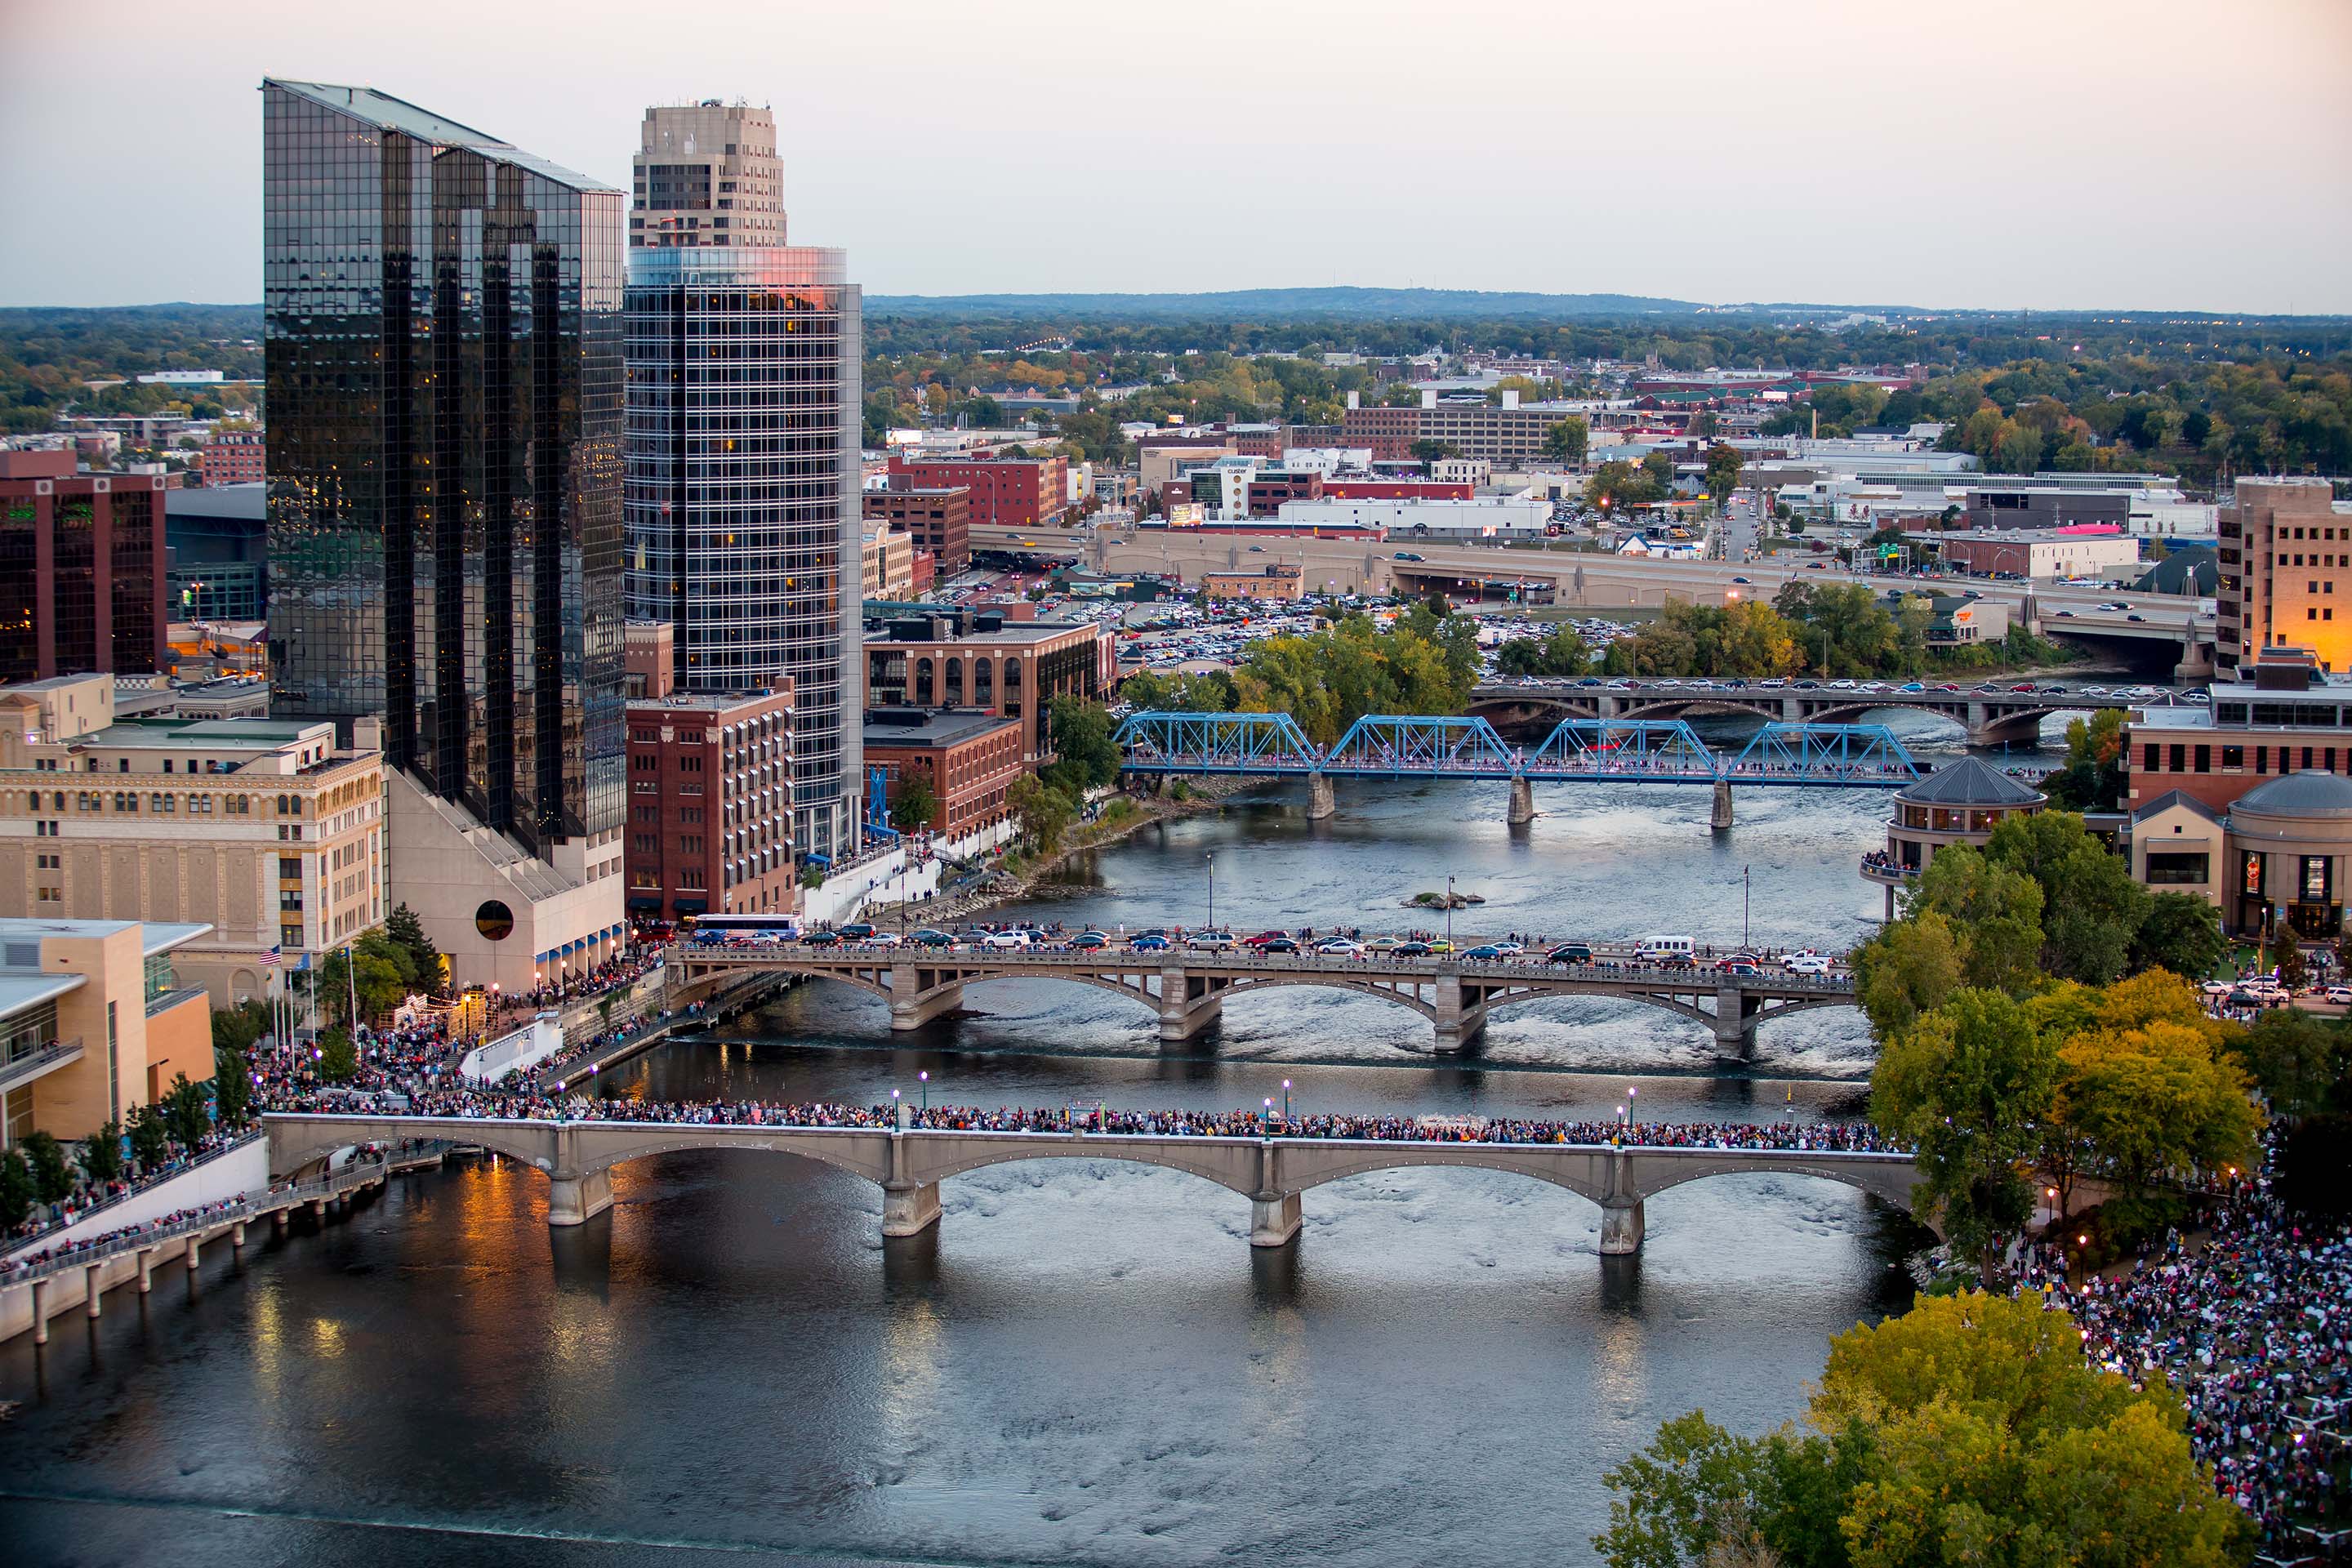 ArtPrize takes place in Grand Rapids, Michigan from September 24 to October...